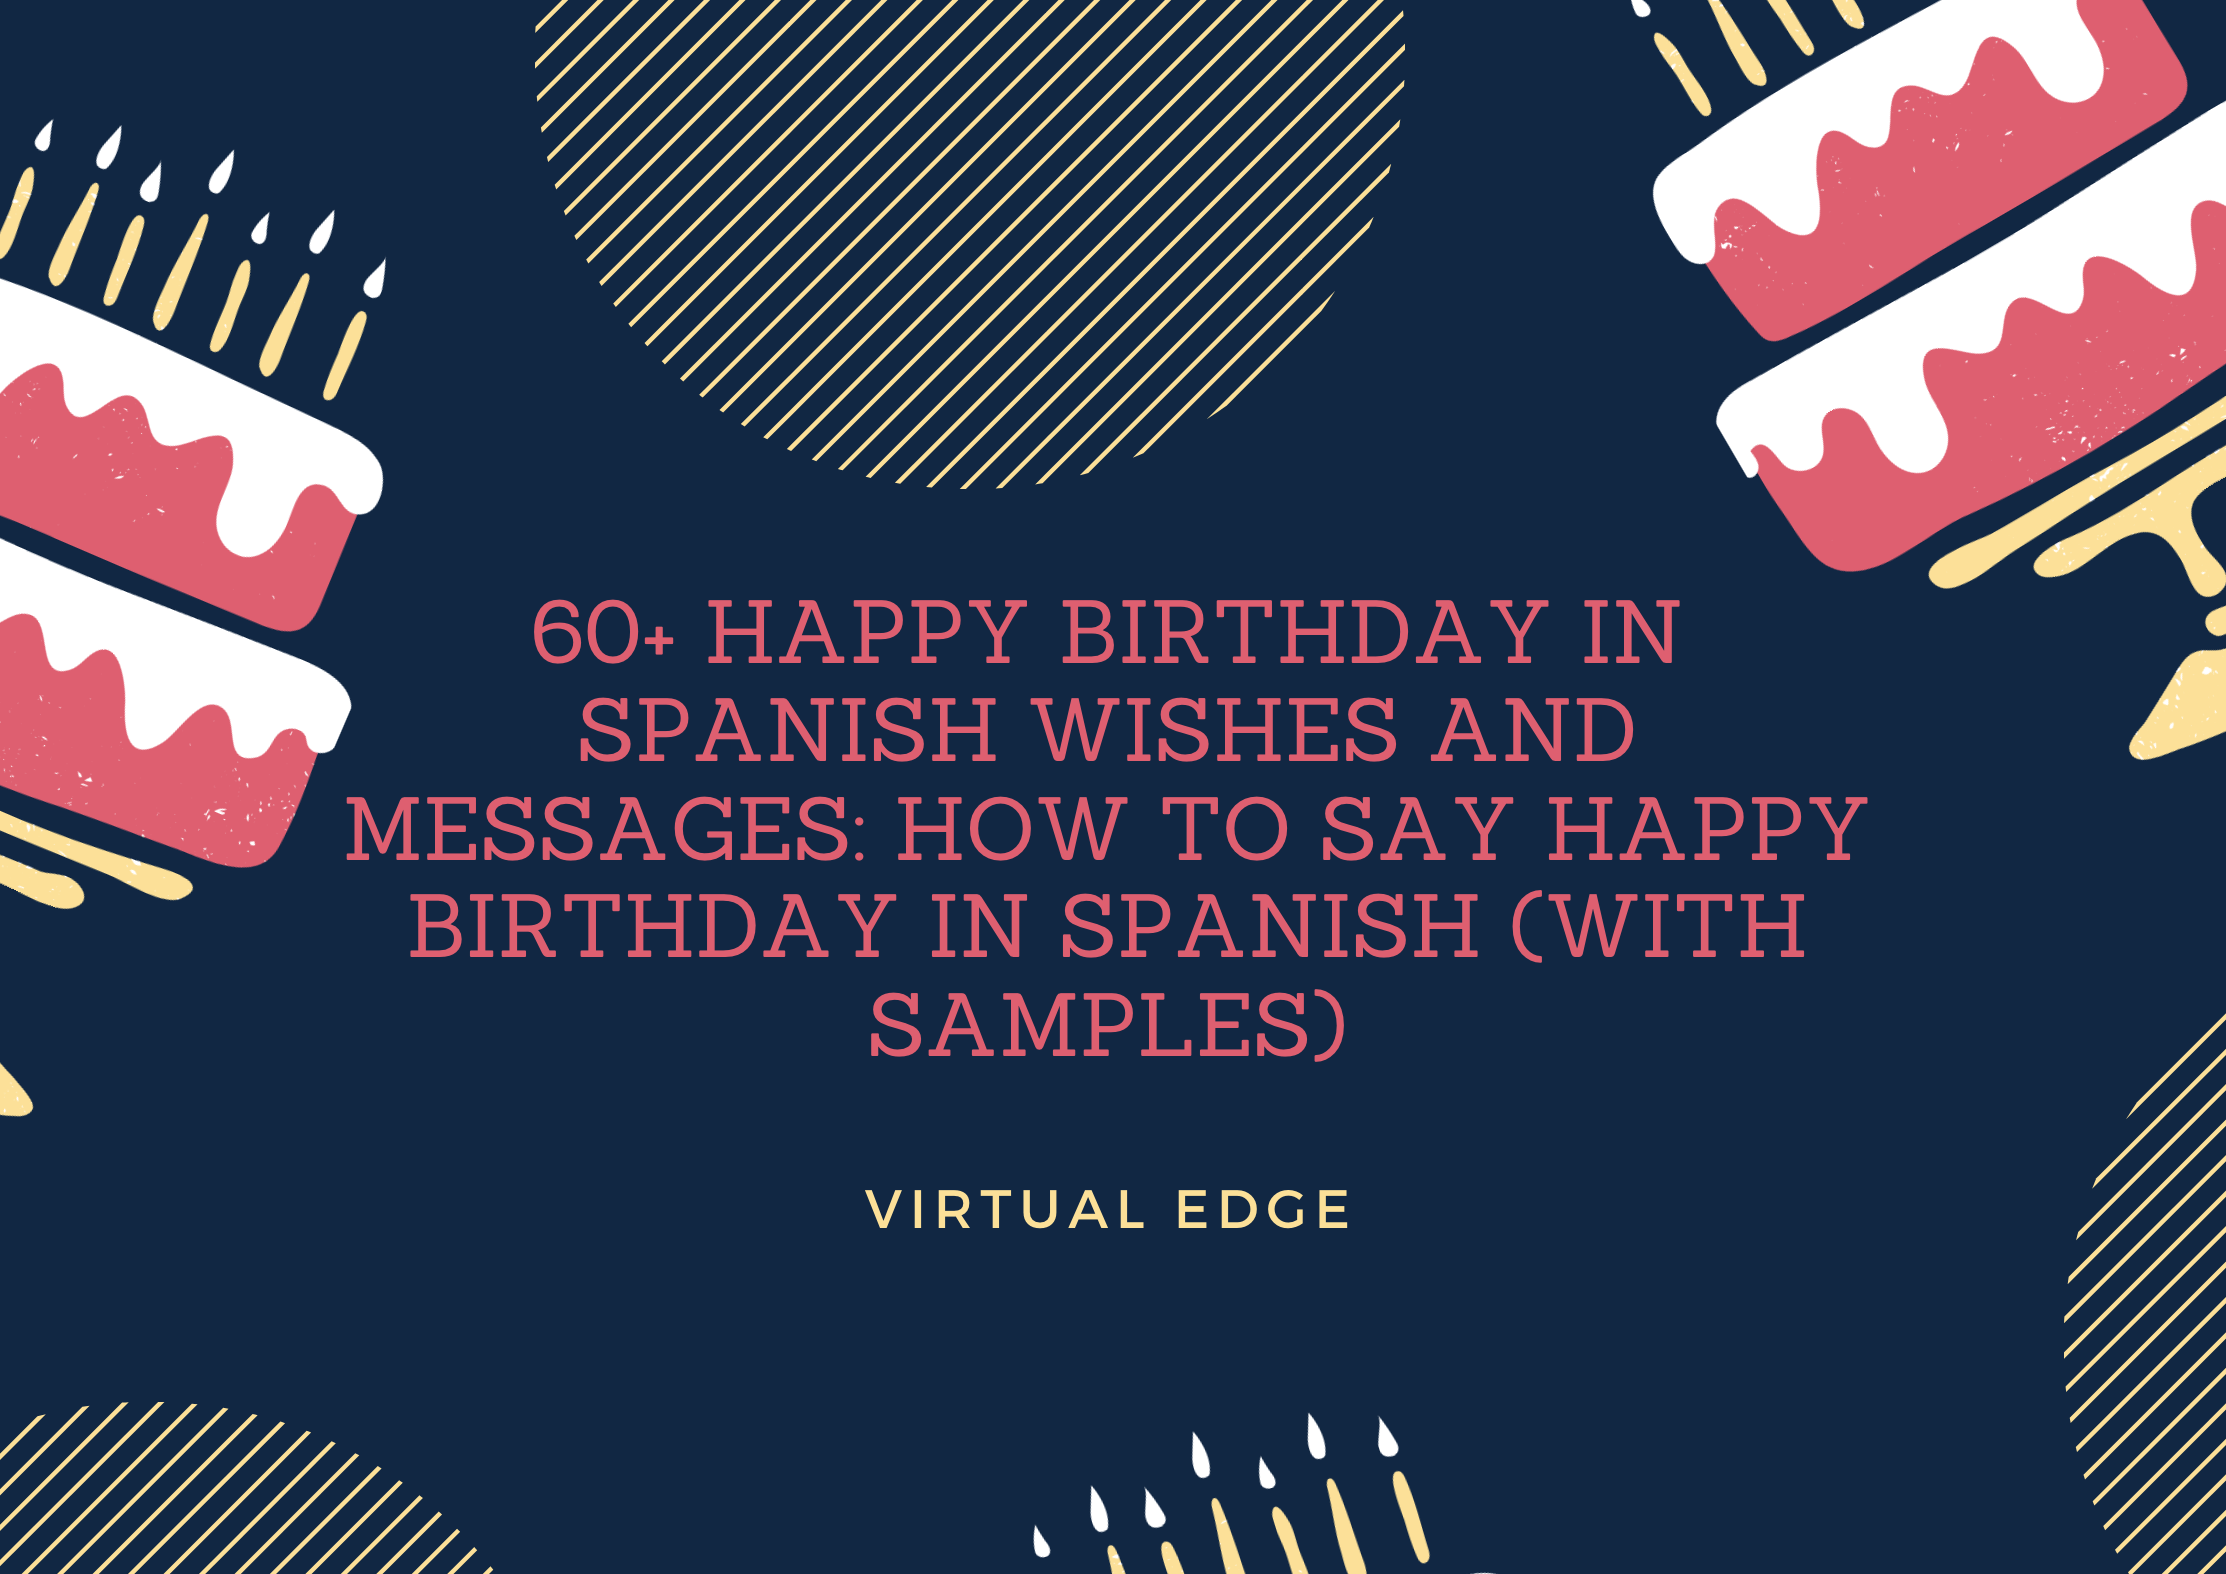 60+ Happy Birthday in Spanish Wishes and Messages: How to Say Happy Birthday in Spanish (With Samples)